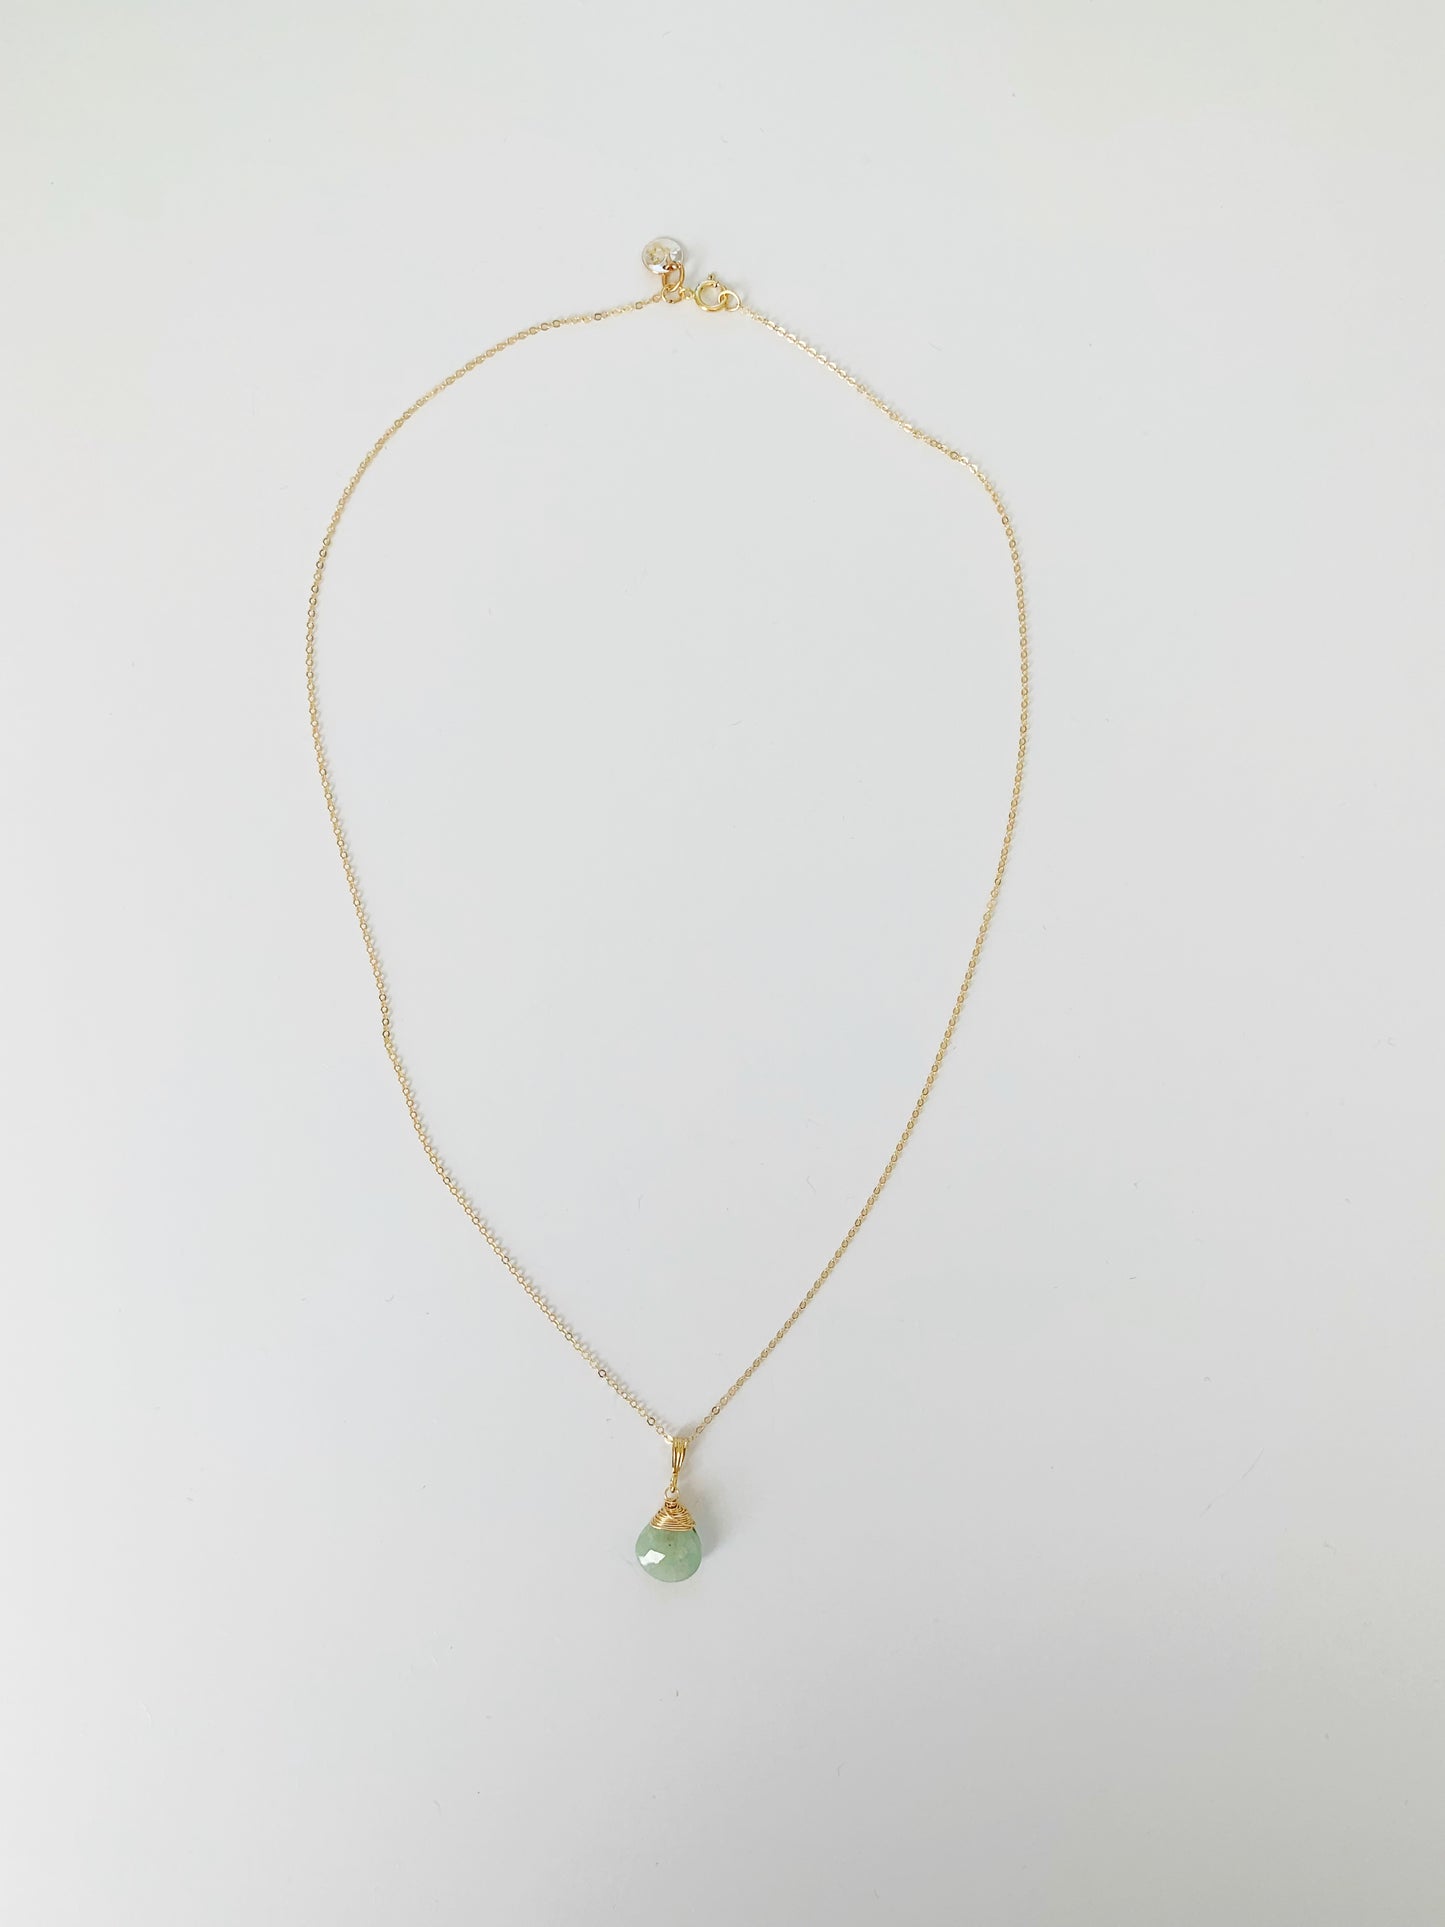 A full length view of the raindrop necklace in 14k gold filled with aquamarine wire wrapped pendant on a white surface